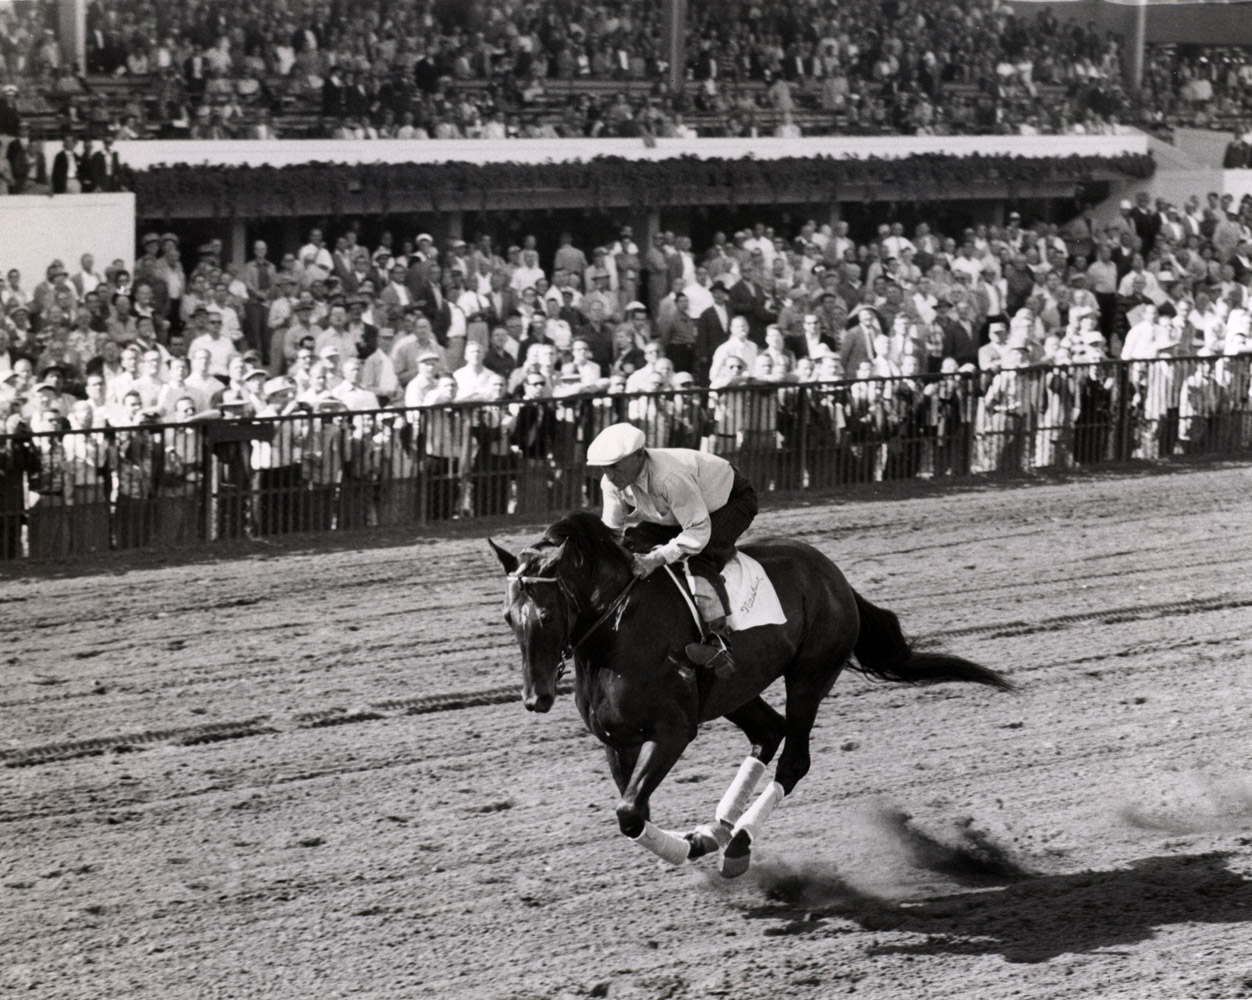 Nashua being exercised at Hialeah, March 1955 (Museum Collection)